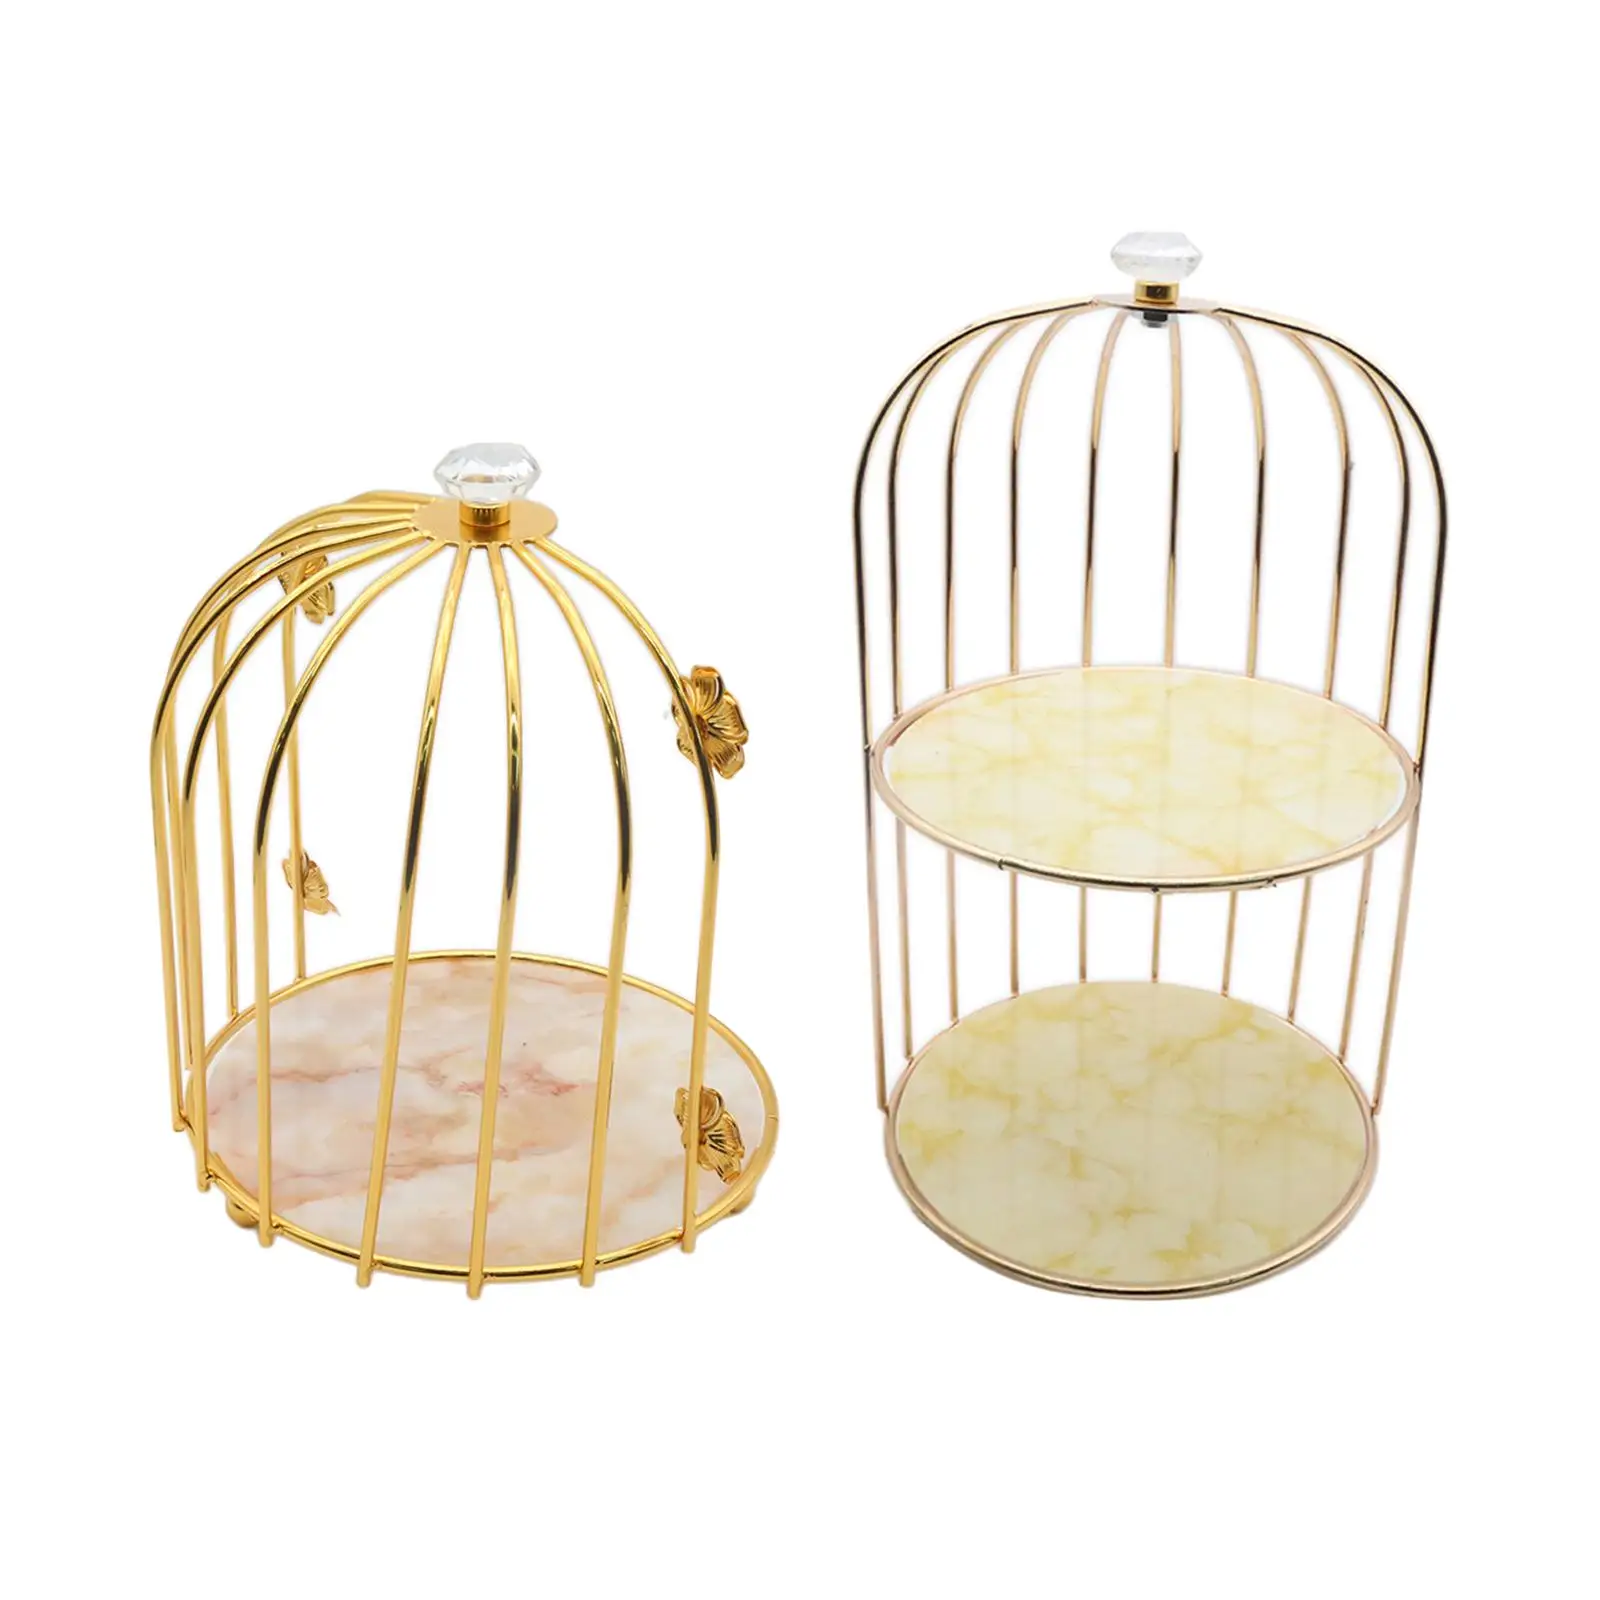 Metal Bird Cage Makeup Organizer Perfume Lipstick Cupcake Stand Holder Nordic Cosmetic Rack for Bedroom Home Dresser Decoration